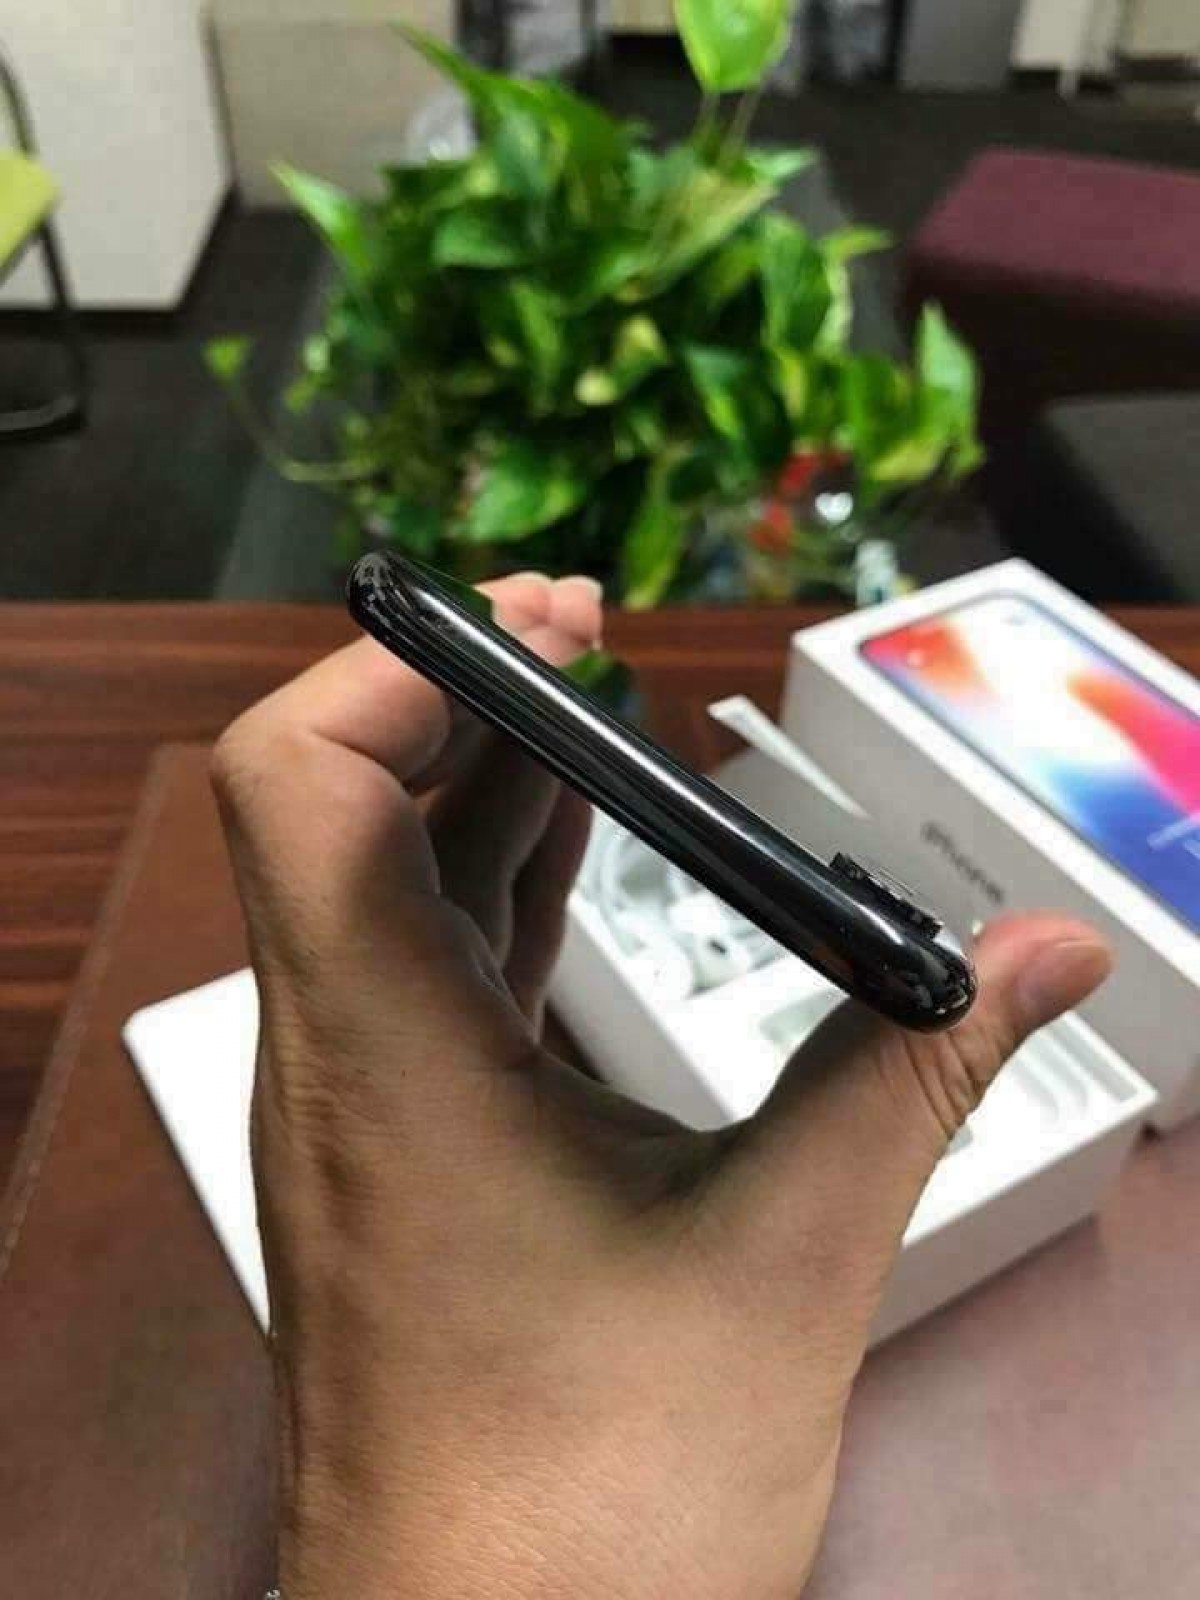 Apple iphone X 256GB for sale in Kingston Kingston St Andrew - Phones